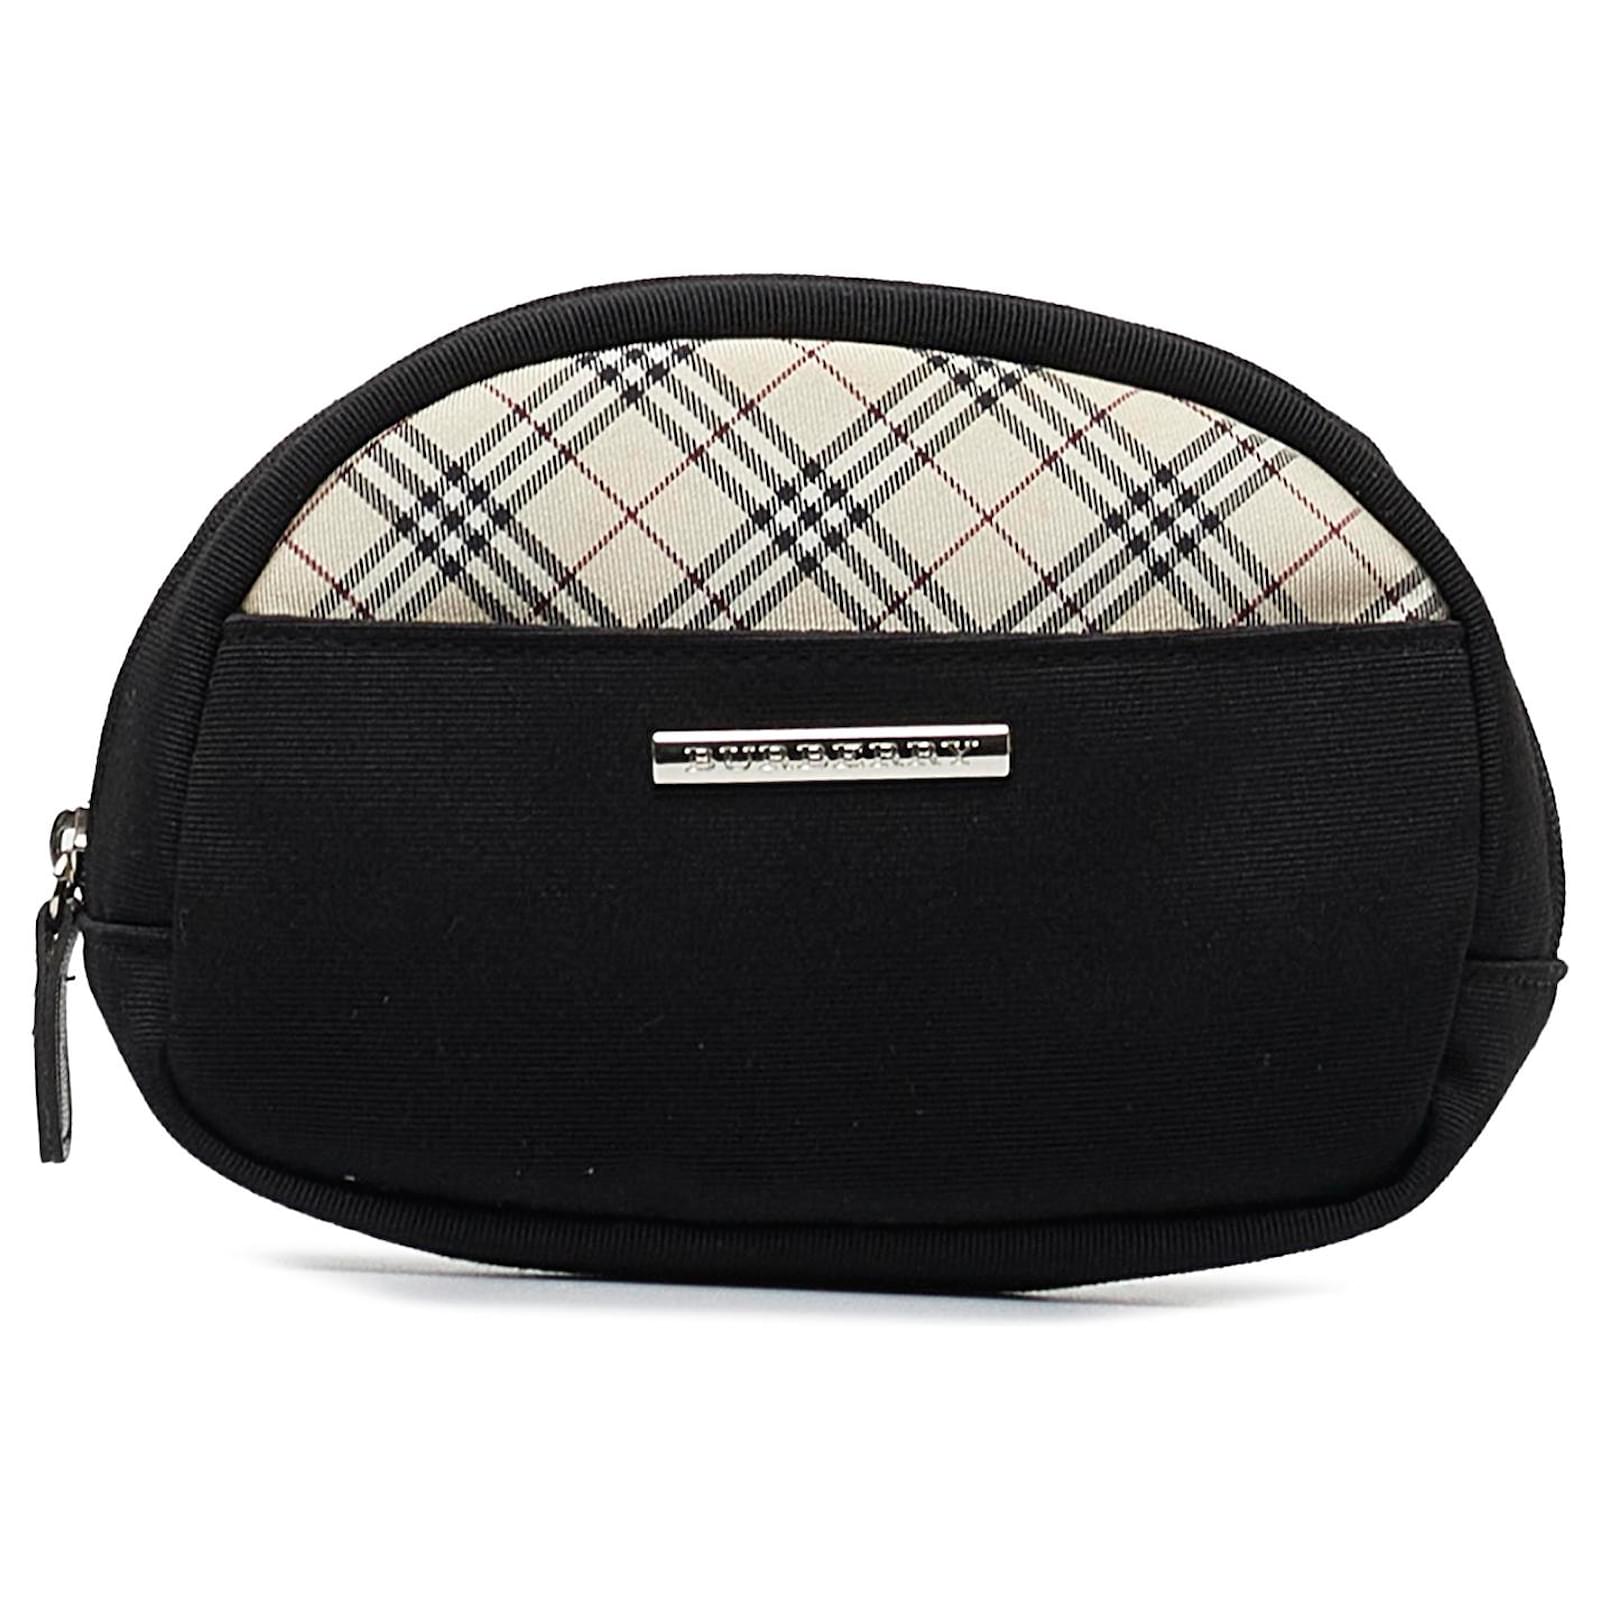 Burberry Black Small Grainy Leather TB Bag - Current Season | Leather, Bags,  Burberry